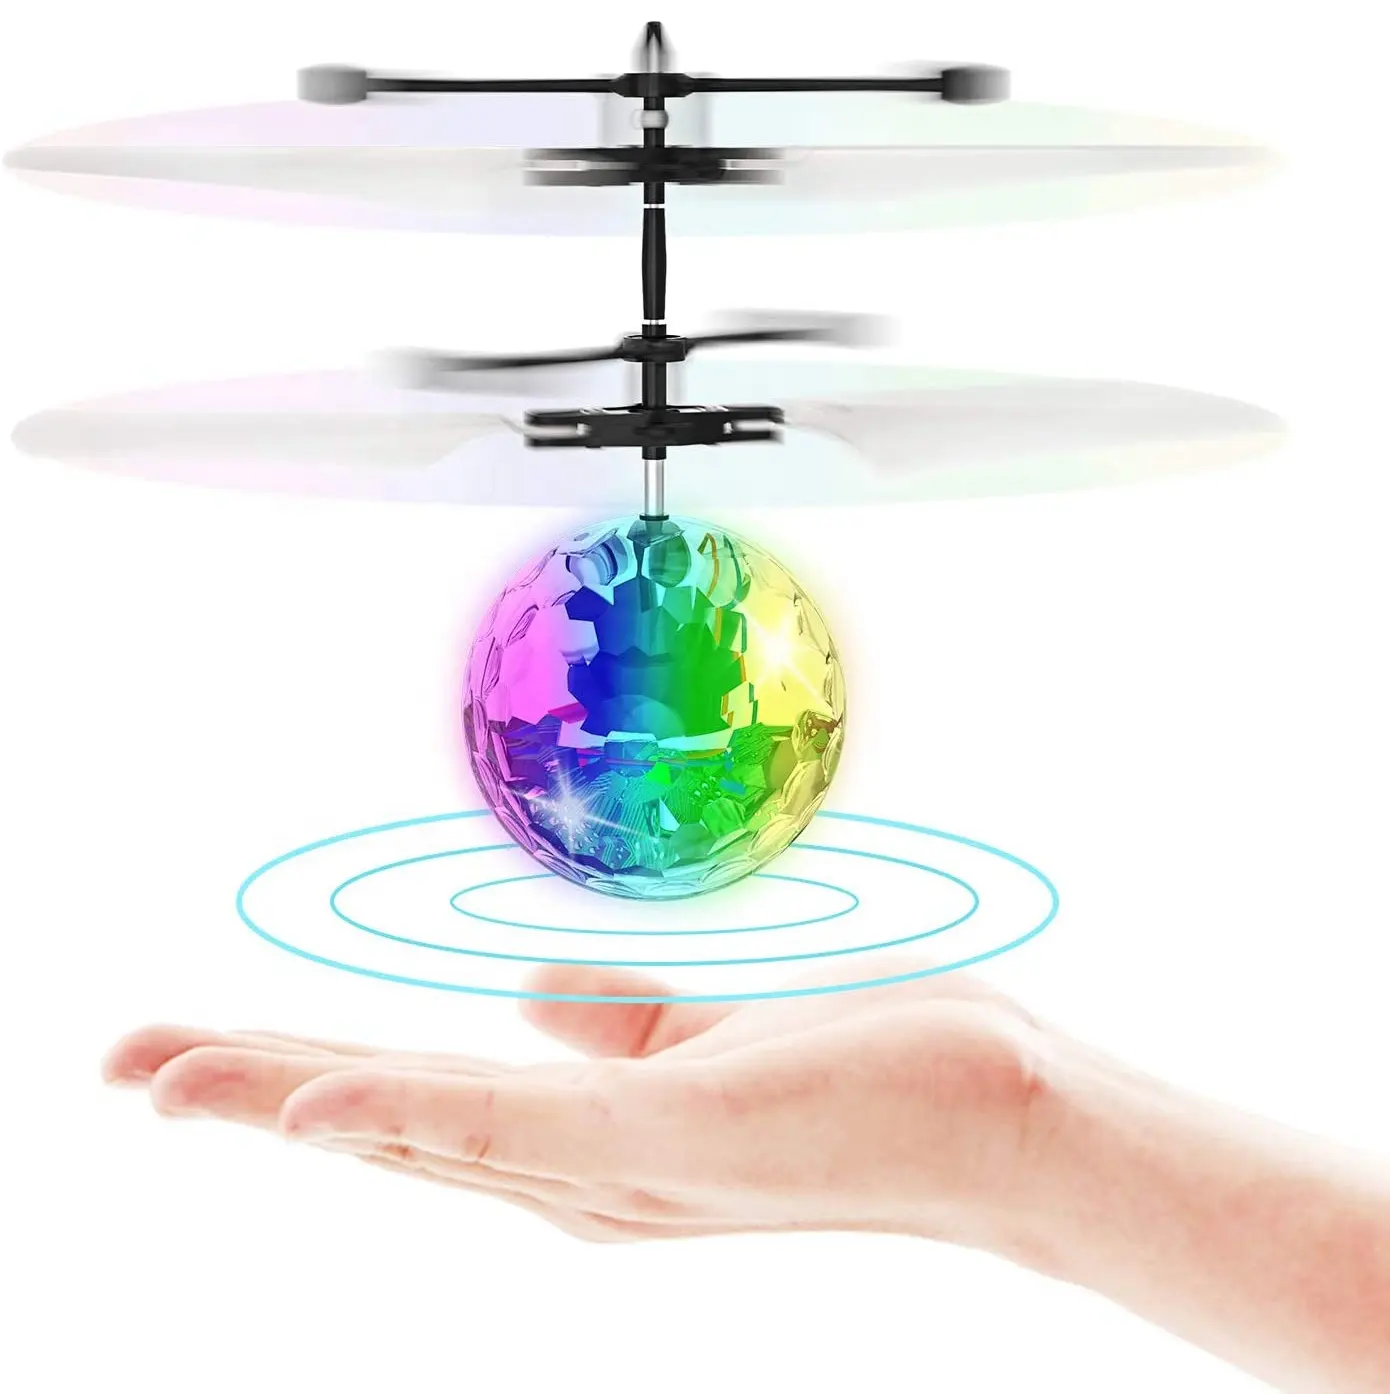 Cheap Factory Price New Collection Flying Toy Ball Infrared Induction RC Flying Toy Helicopter with Colorful LED Light